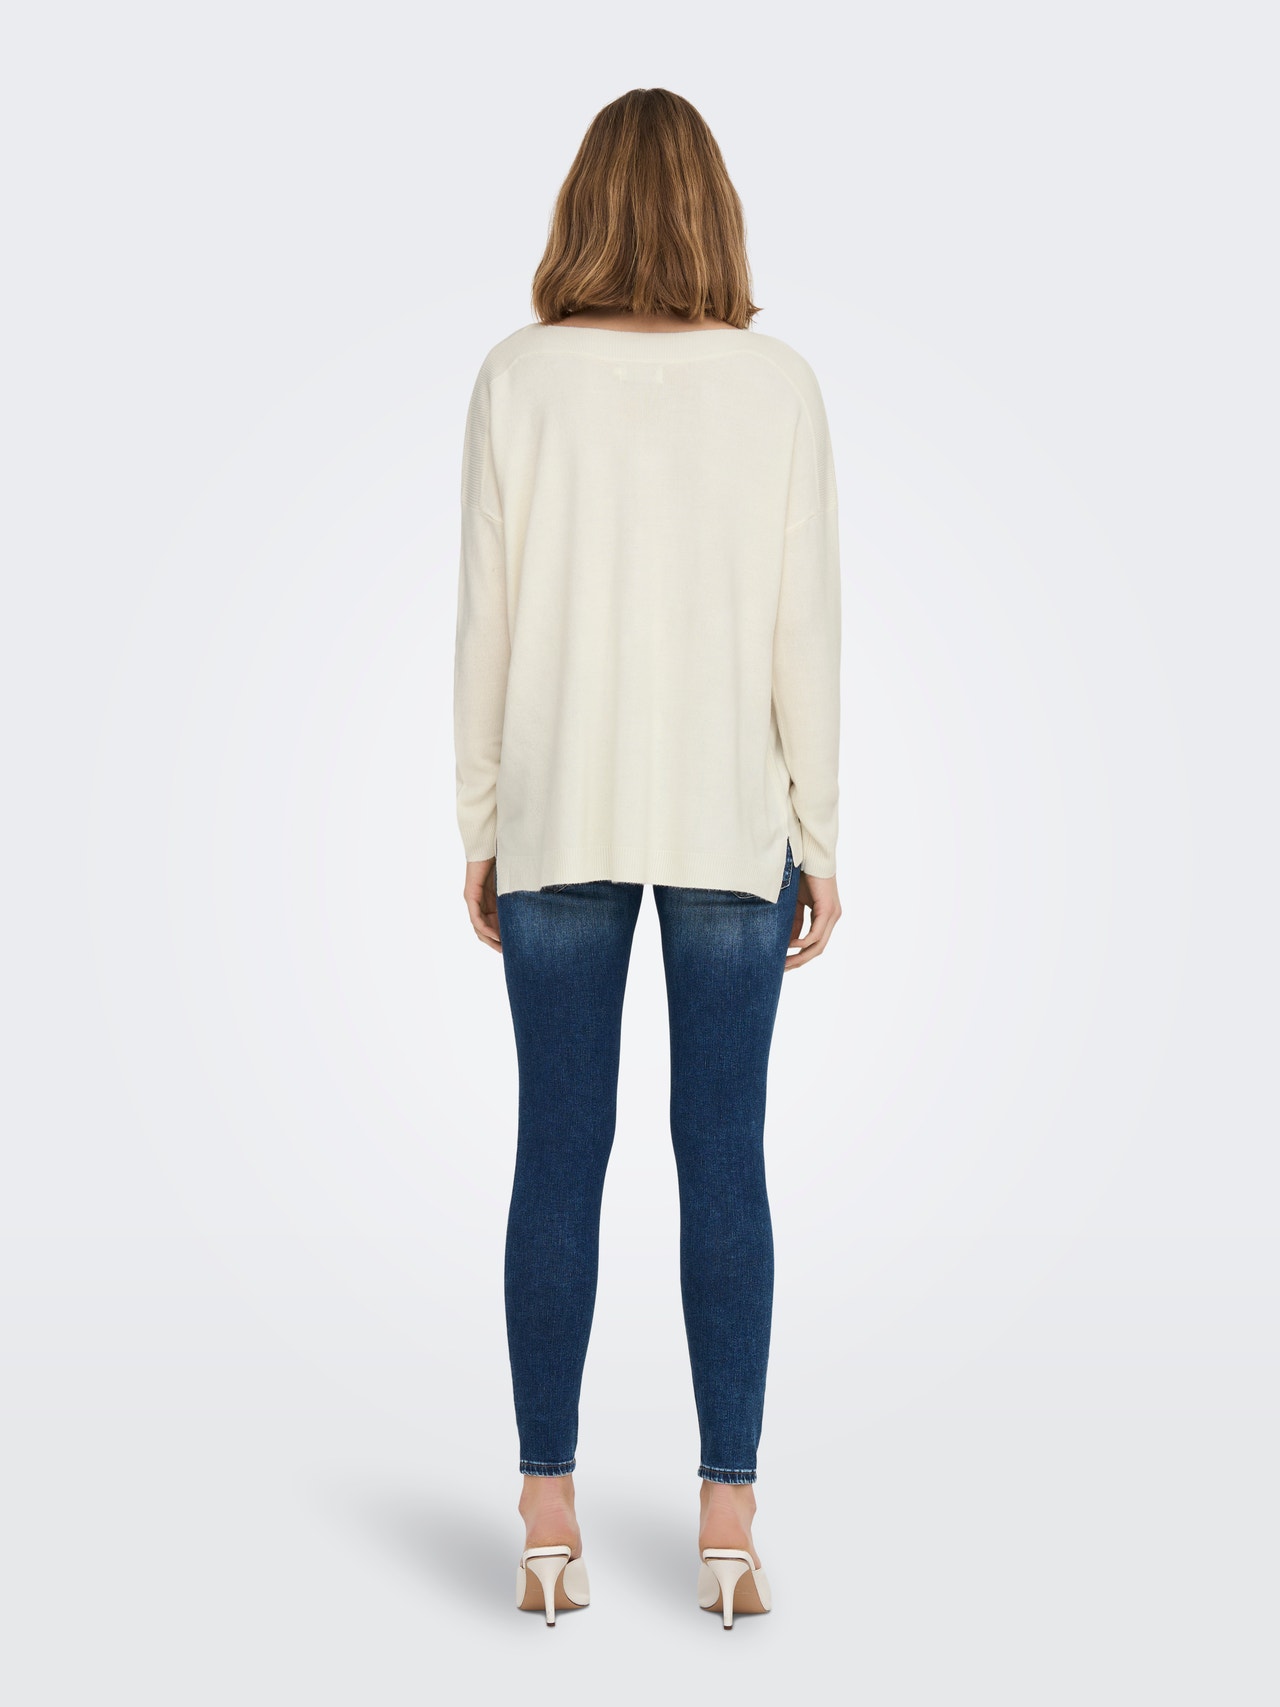 ONLY Boat neck High cuffs Dropped shoulders Pullover -Cloud Dancer - 15280492